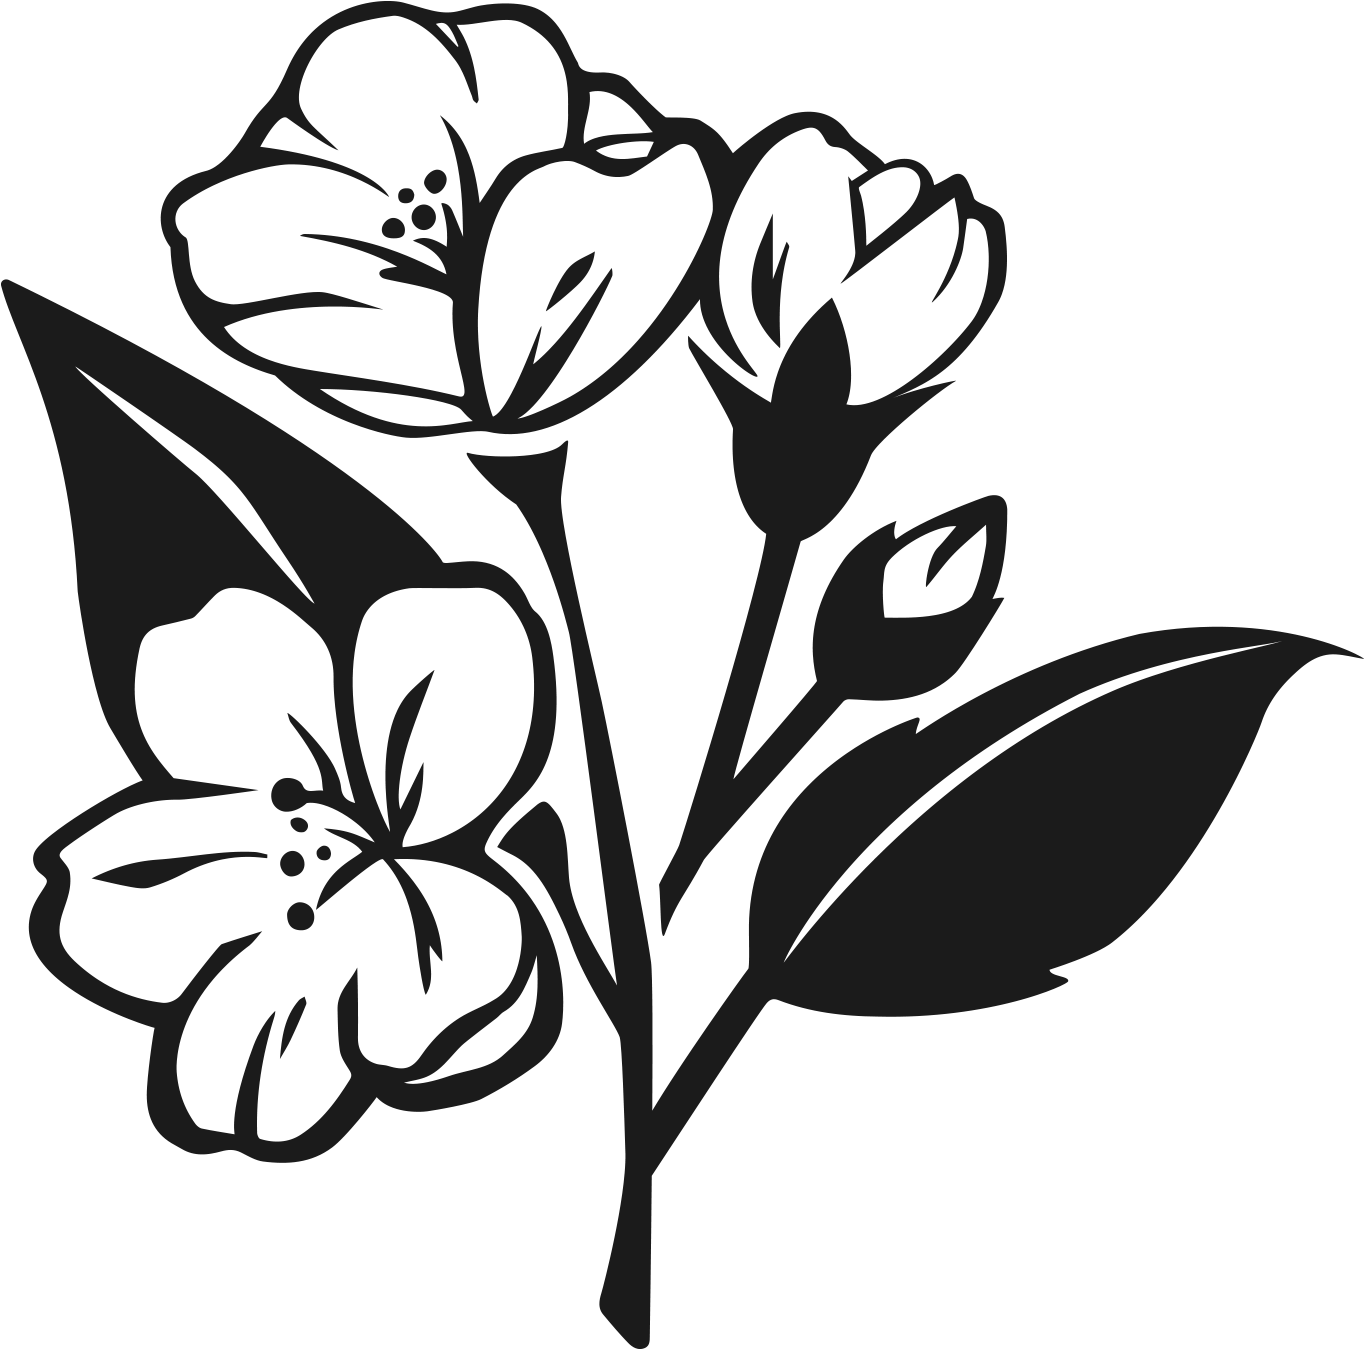 A Black Flower With Leaves